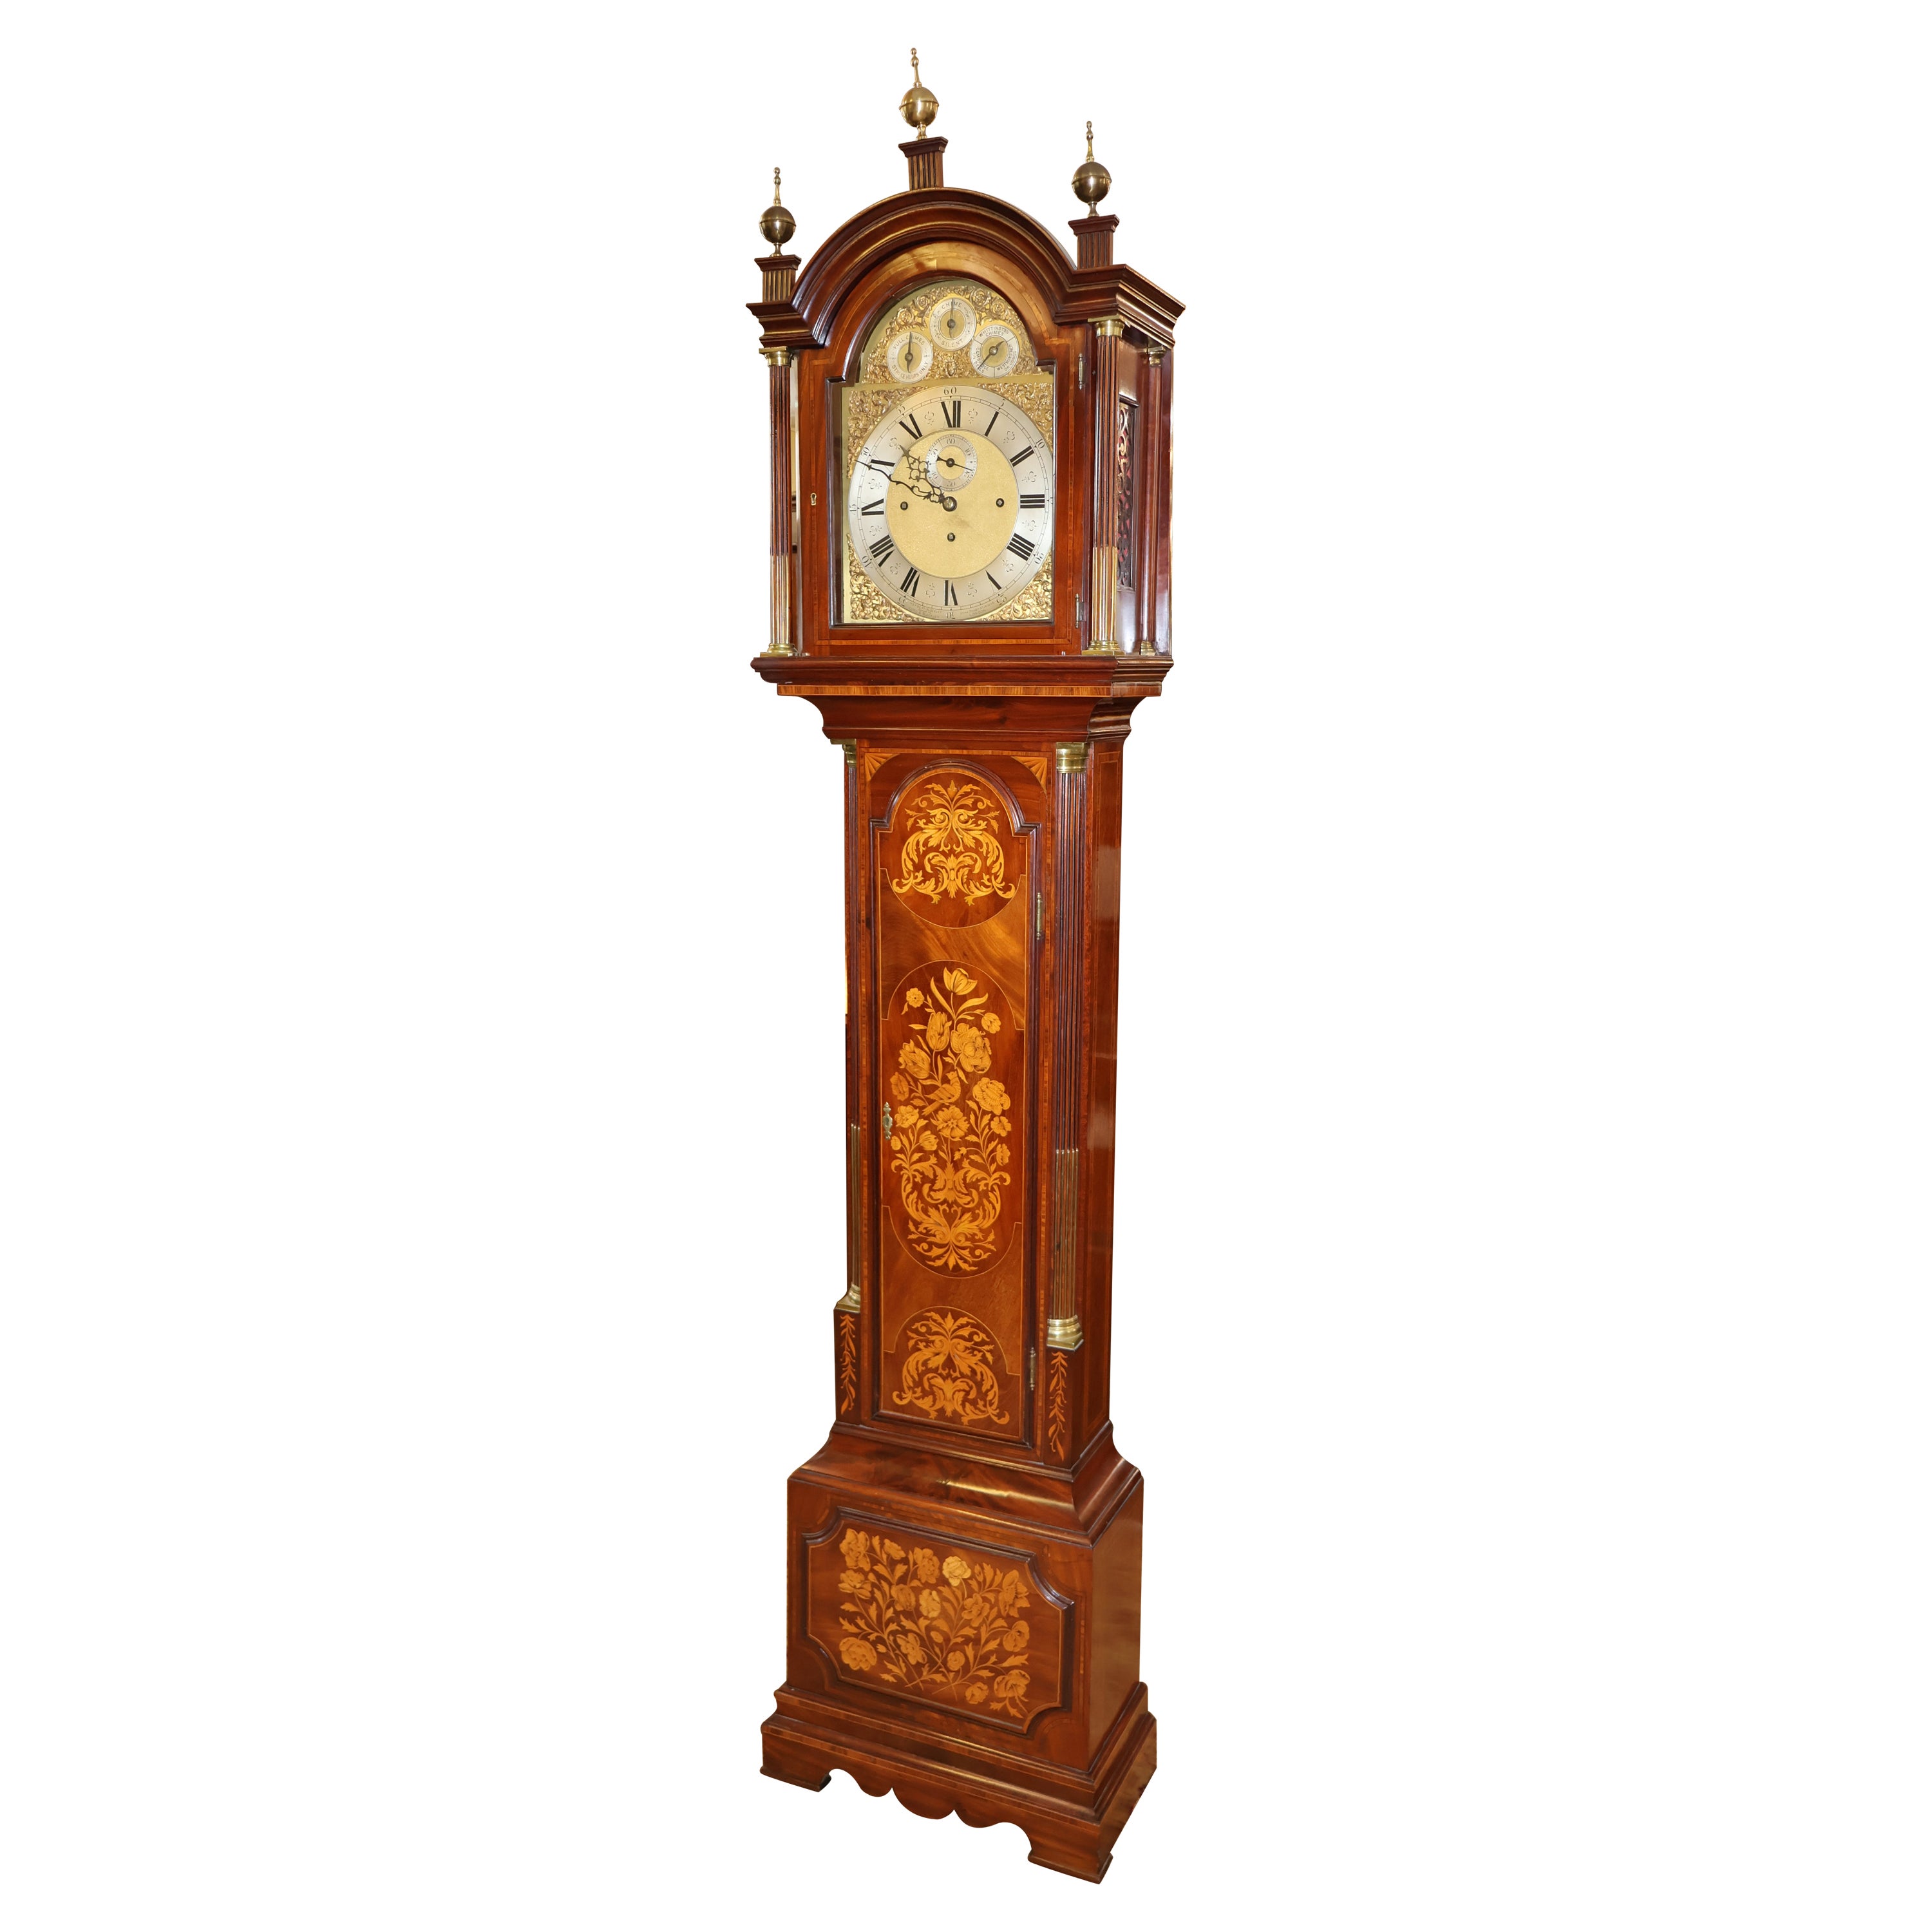 Herbert Blockley London Musical 19th Century Inlaid Tall Case Grandfather Clock For Sale